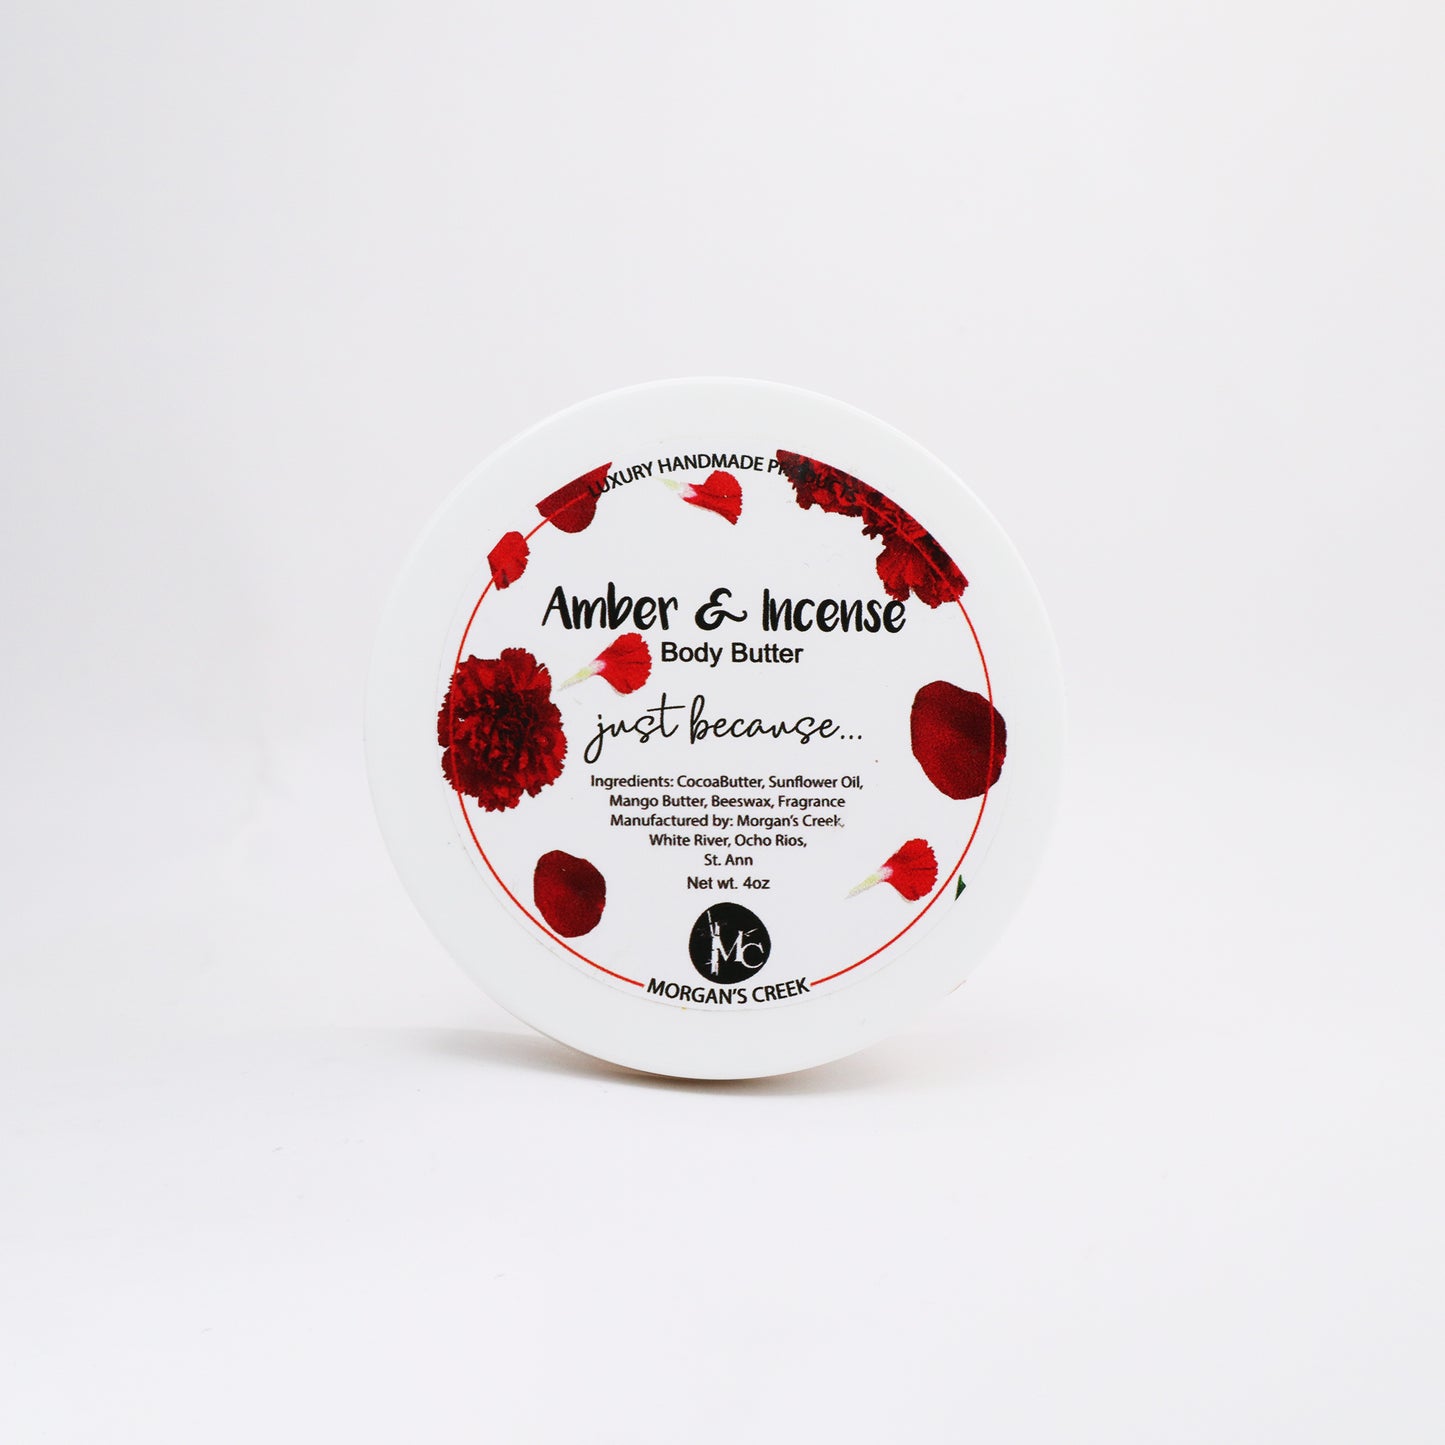 Amber & Incense Body Butter by Morgan's Creek